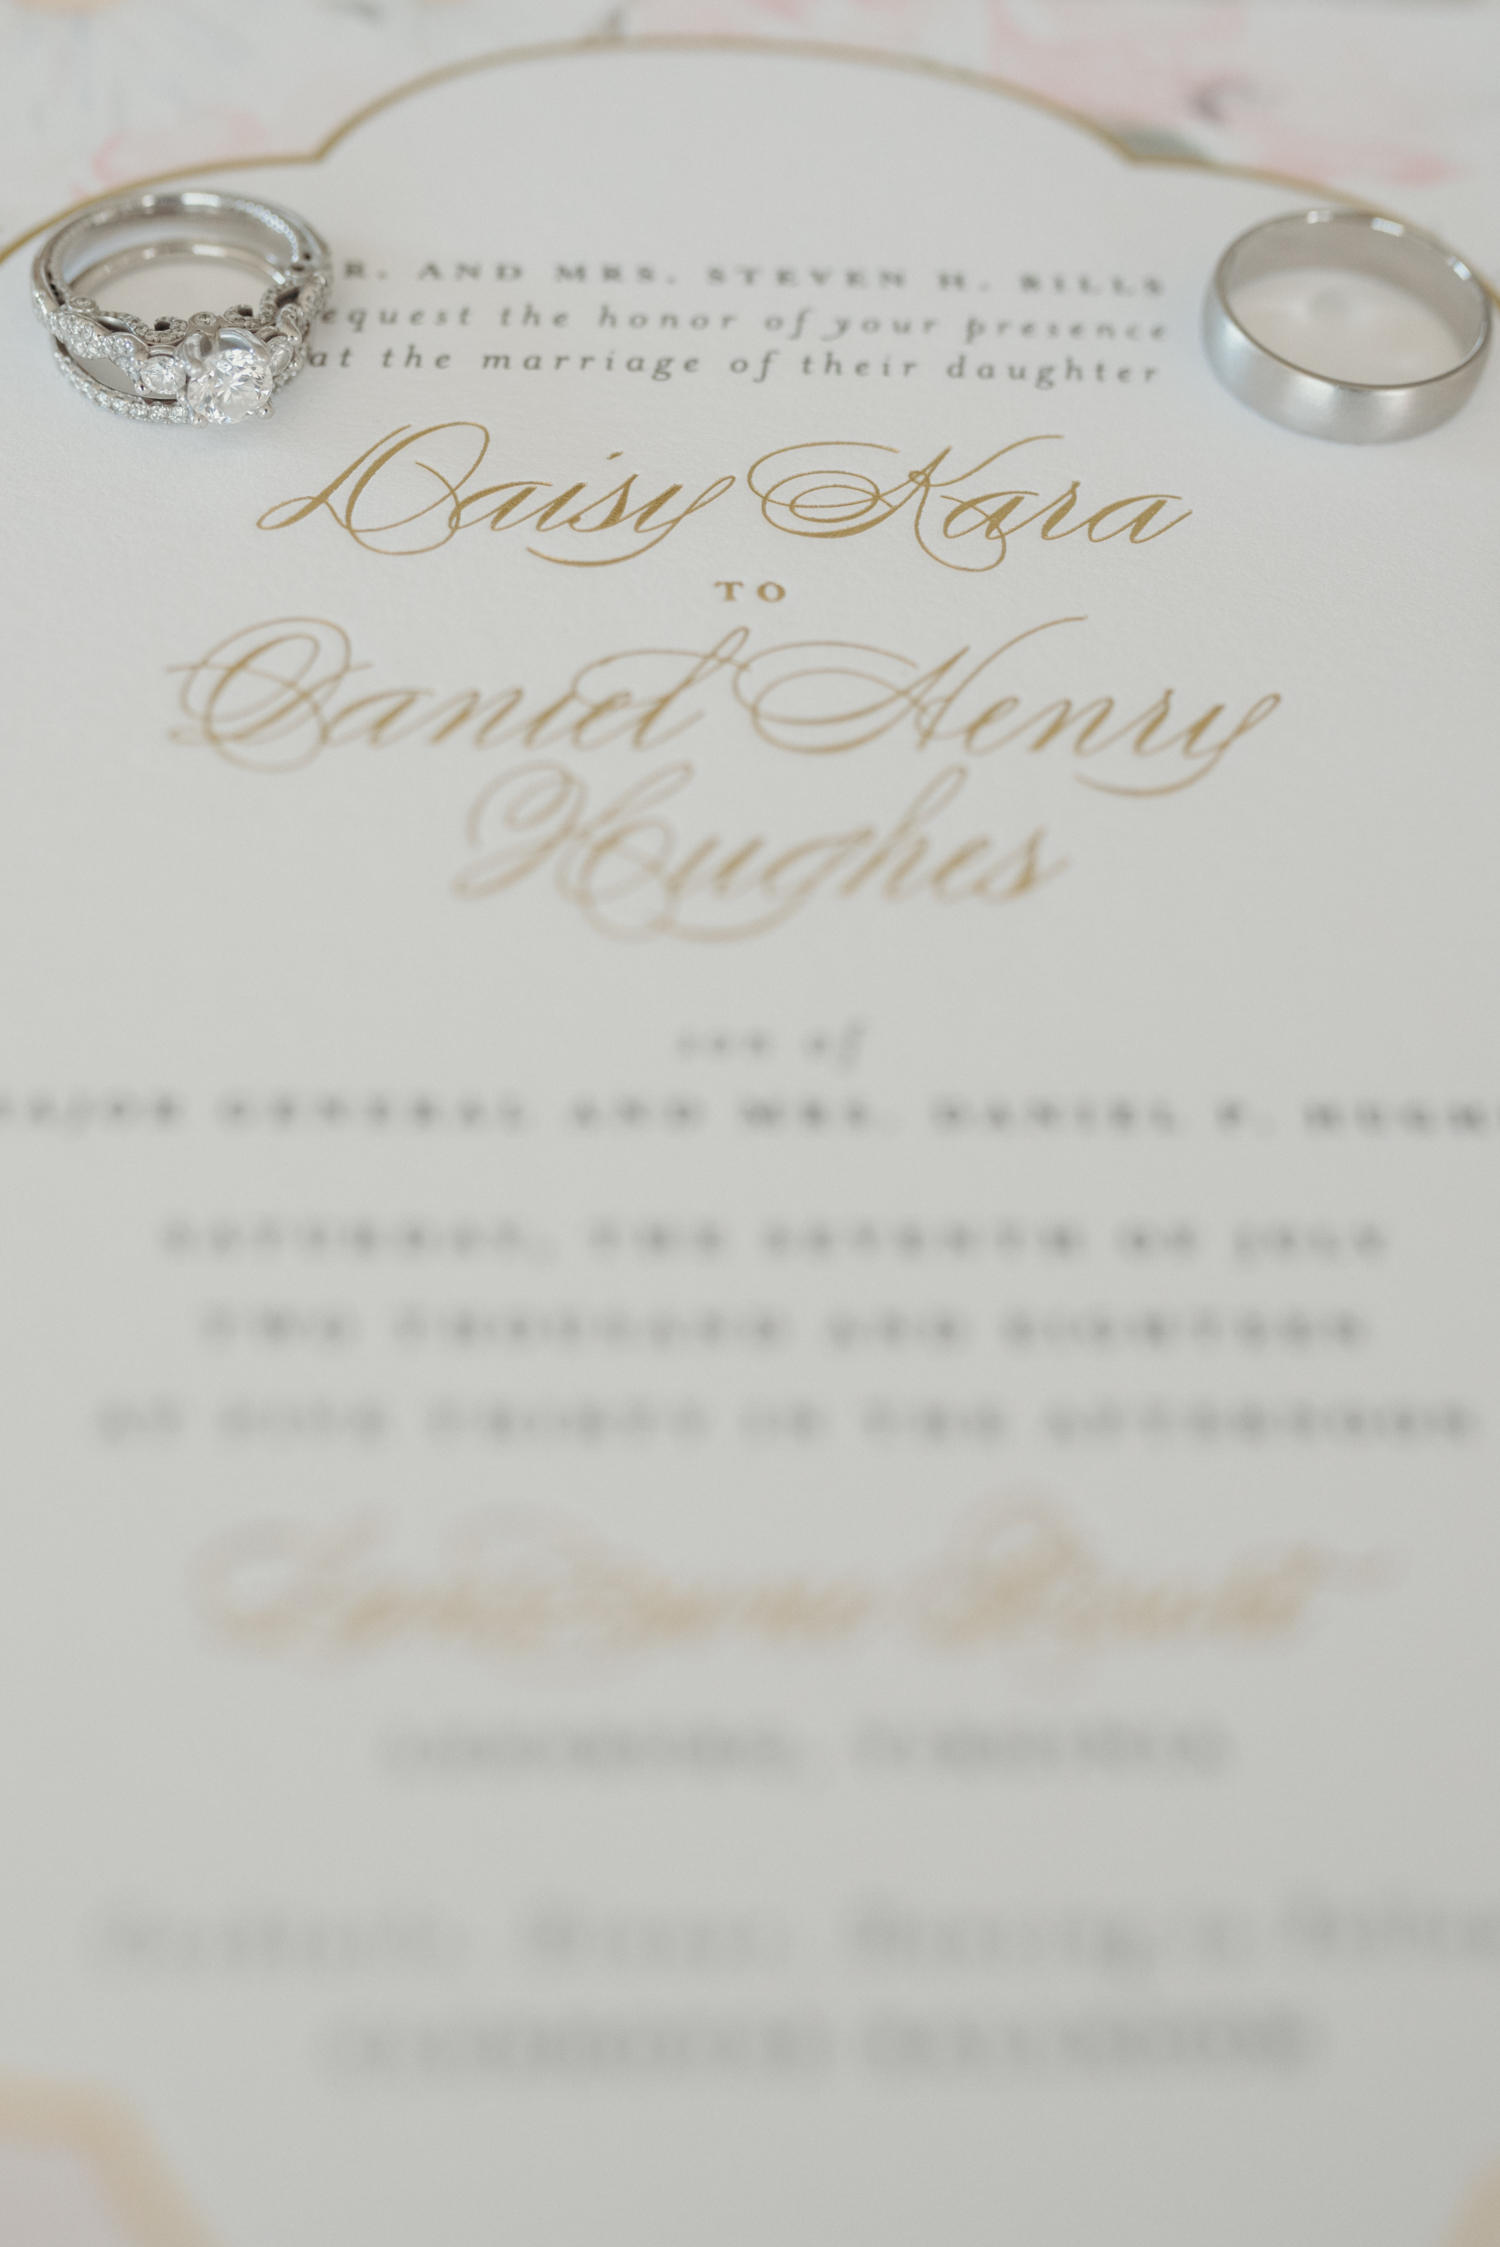 A couple's wedding rings sit on their wedding invitation.